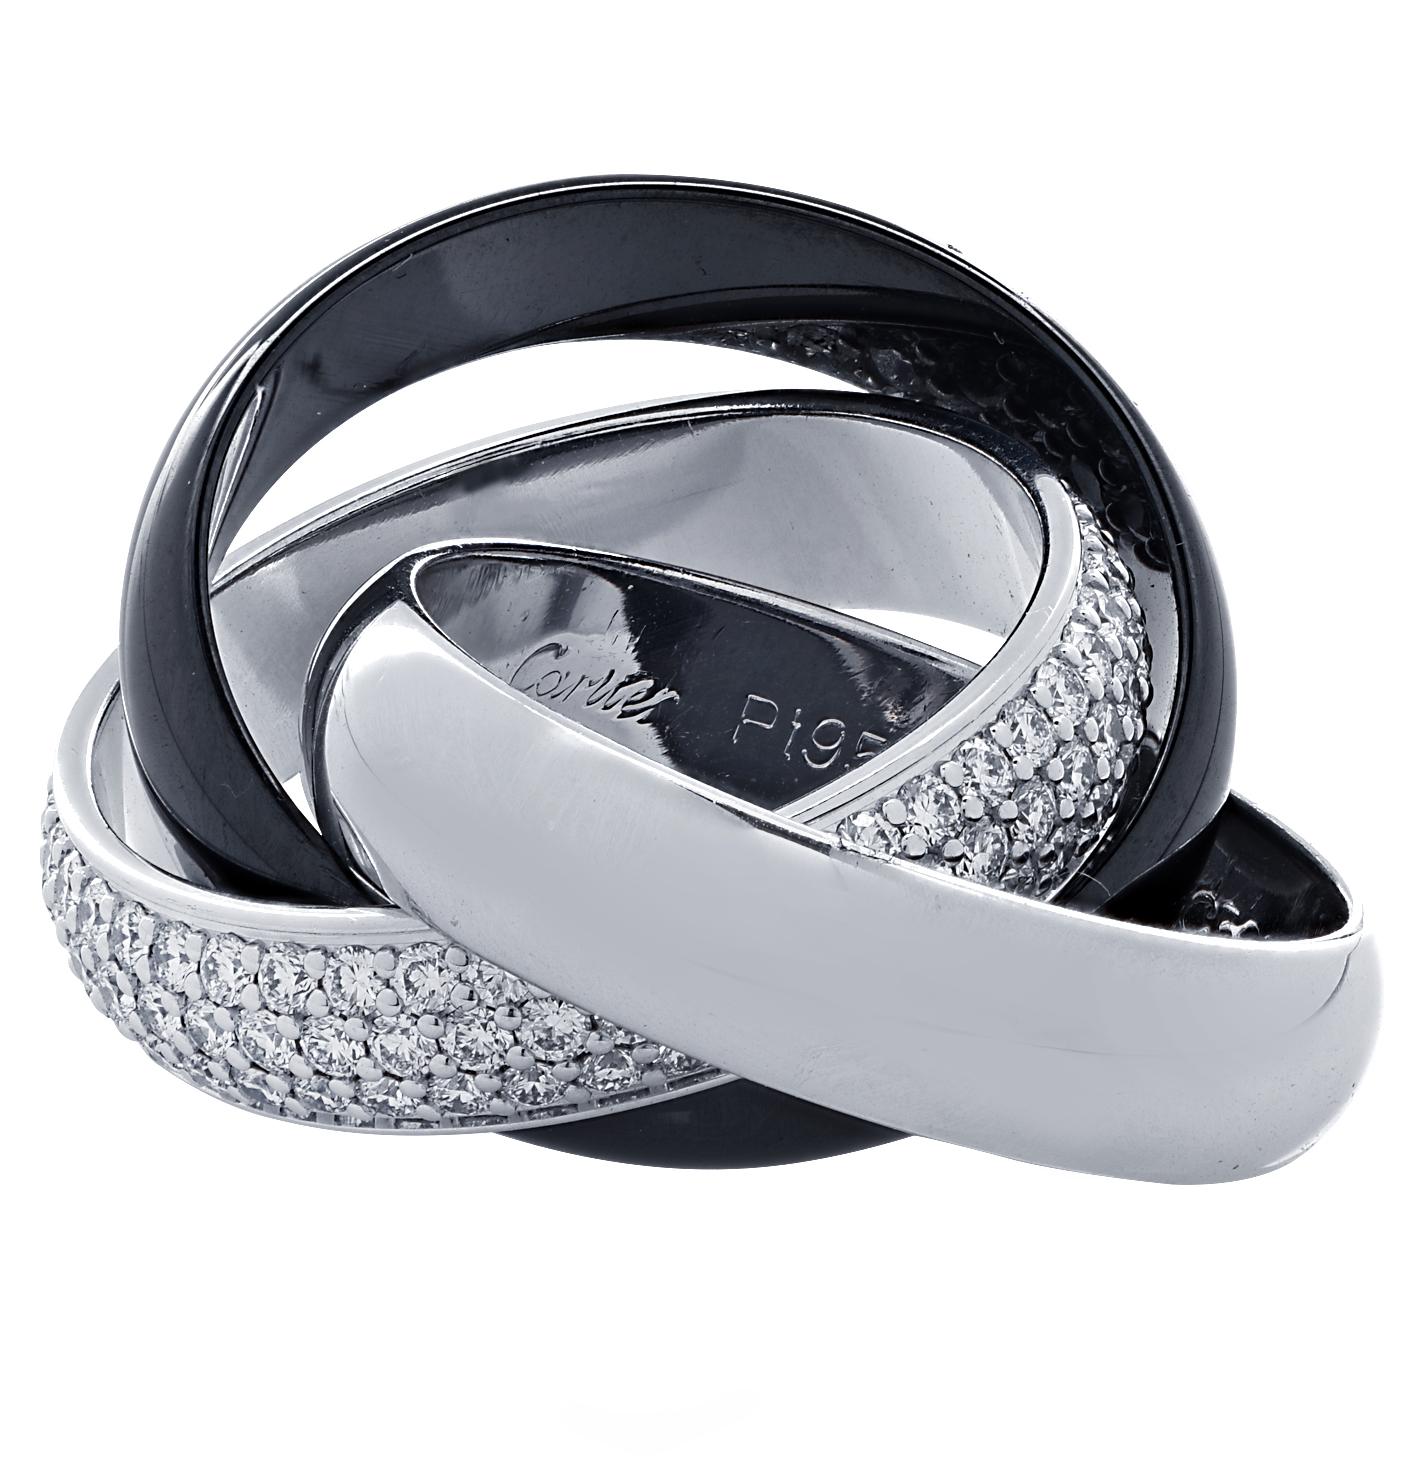 Cartier Trinity de Cartier ring featuring three interlocking bands, one 18 karat white gold, one black ceramic band and one 18 karat white gold band encrusted with 129 pave set diamonds weighing approximately 1.54 carats total, F color, VS clarity.